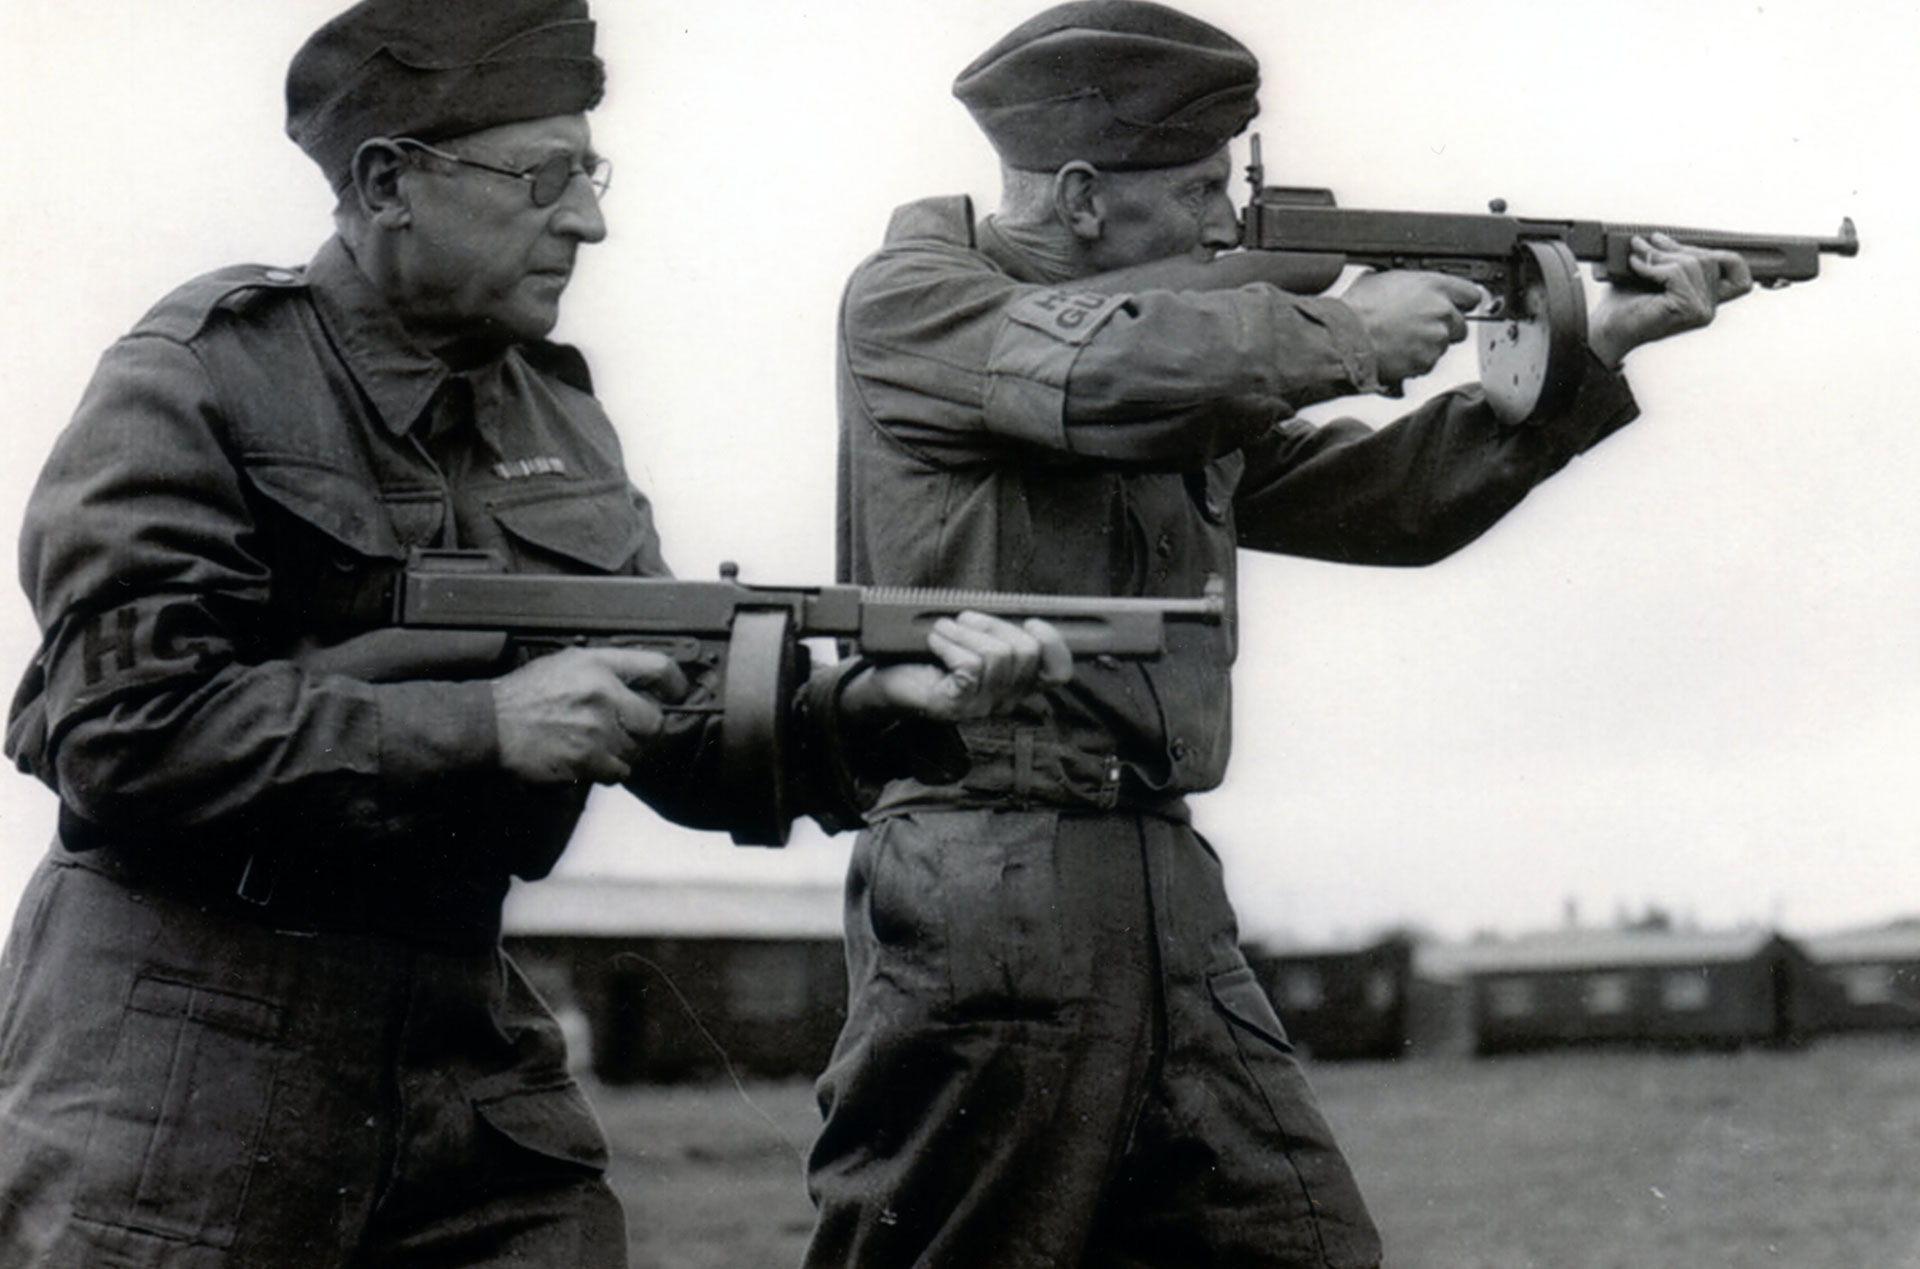 Home Guard men went from poorly-armed to armed-and-dangerous when they received Thompson M1928A1 submachine guns.  The Thompson SMGs were quickly transferred to British Commando units. NARA